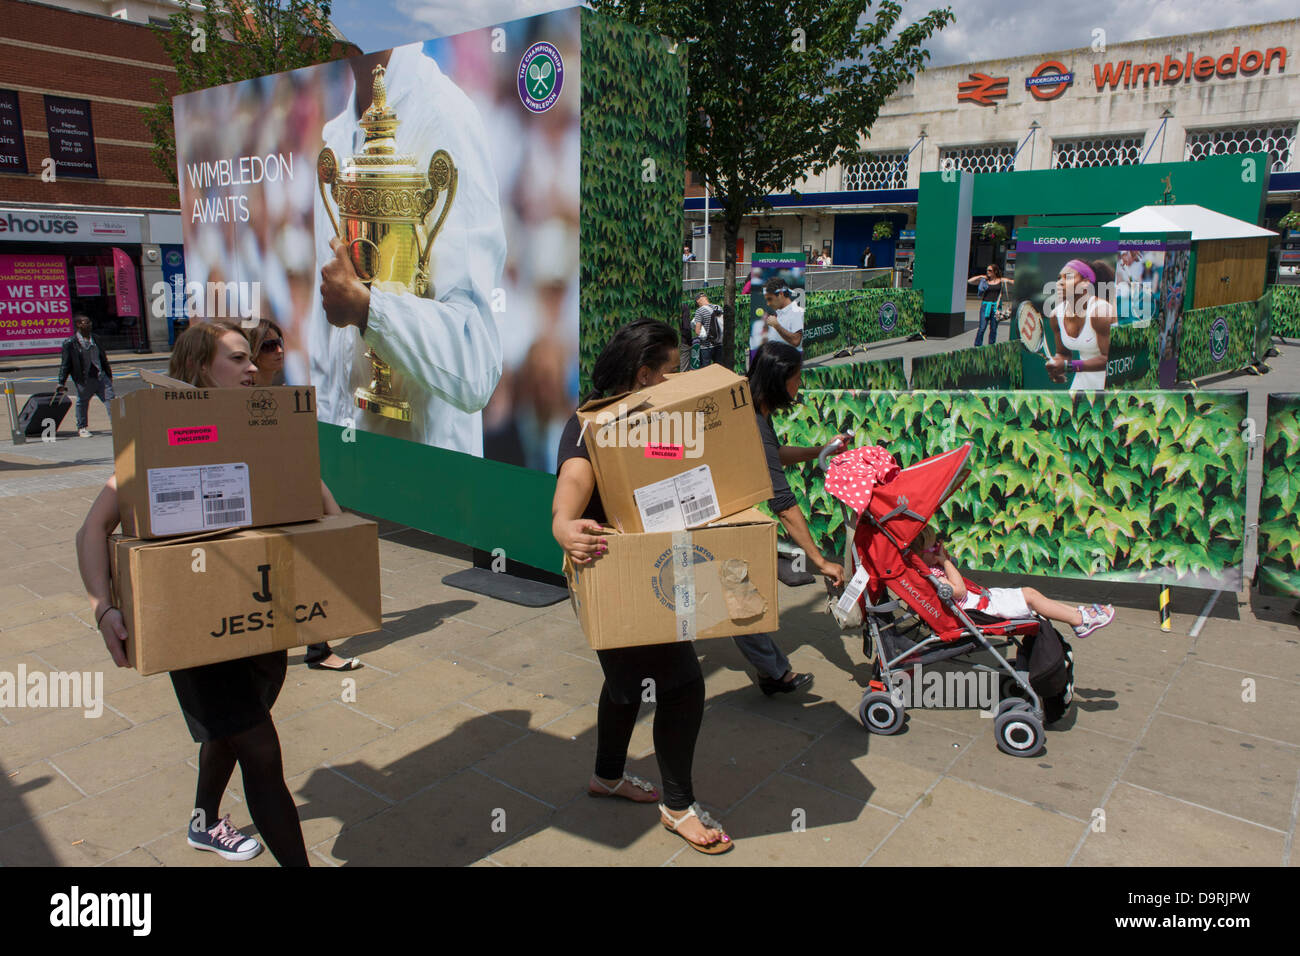 Wimbledon, England, 25th June 2013 - Day 2 of the annual lawn tennis championships women carry boxes and spectators mingle with locals near a large champions trophy billboard, outside the mainline and underground (subway) station in the south London suburb. The Wimbledon Championships, the oldest tennis tournament in the world, have been held at the nearby All England Club since 1877. Stock Photo